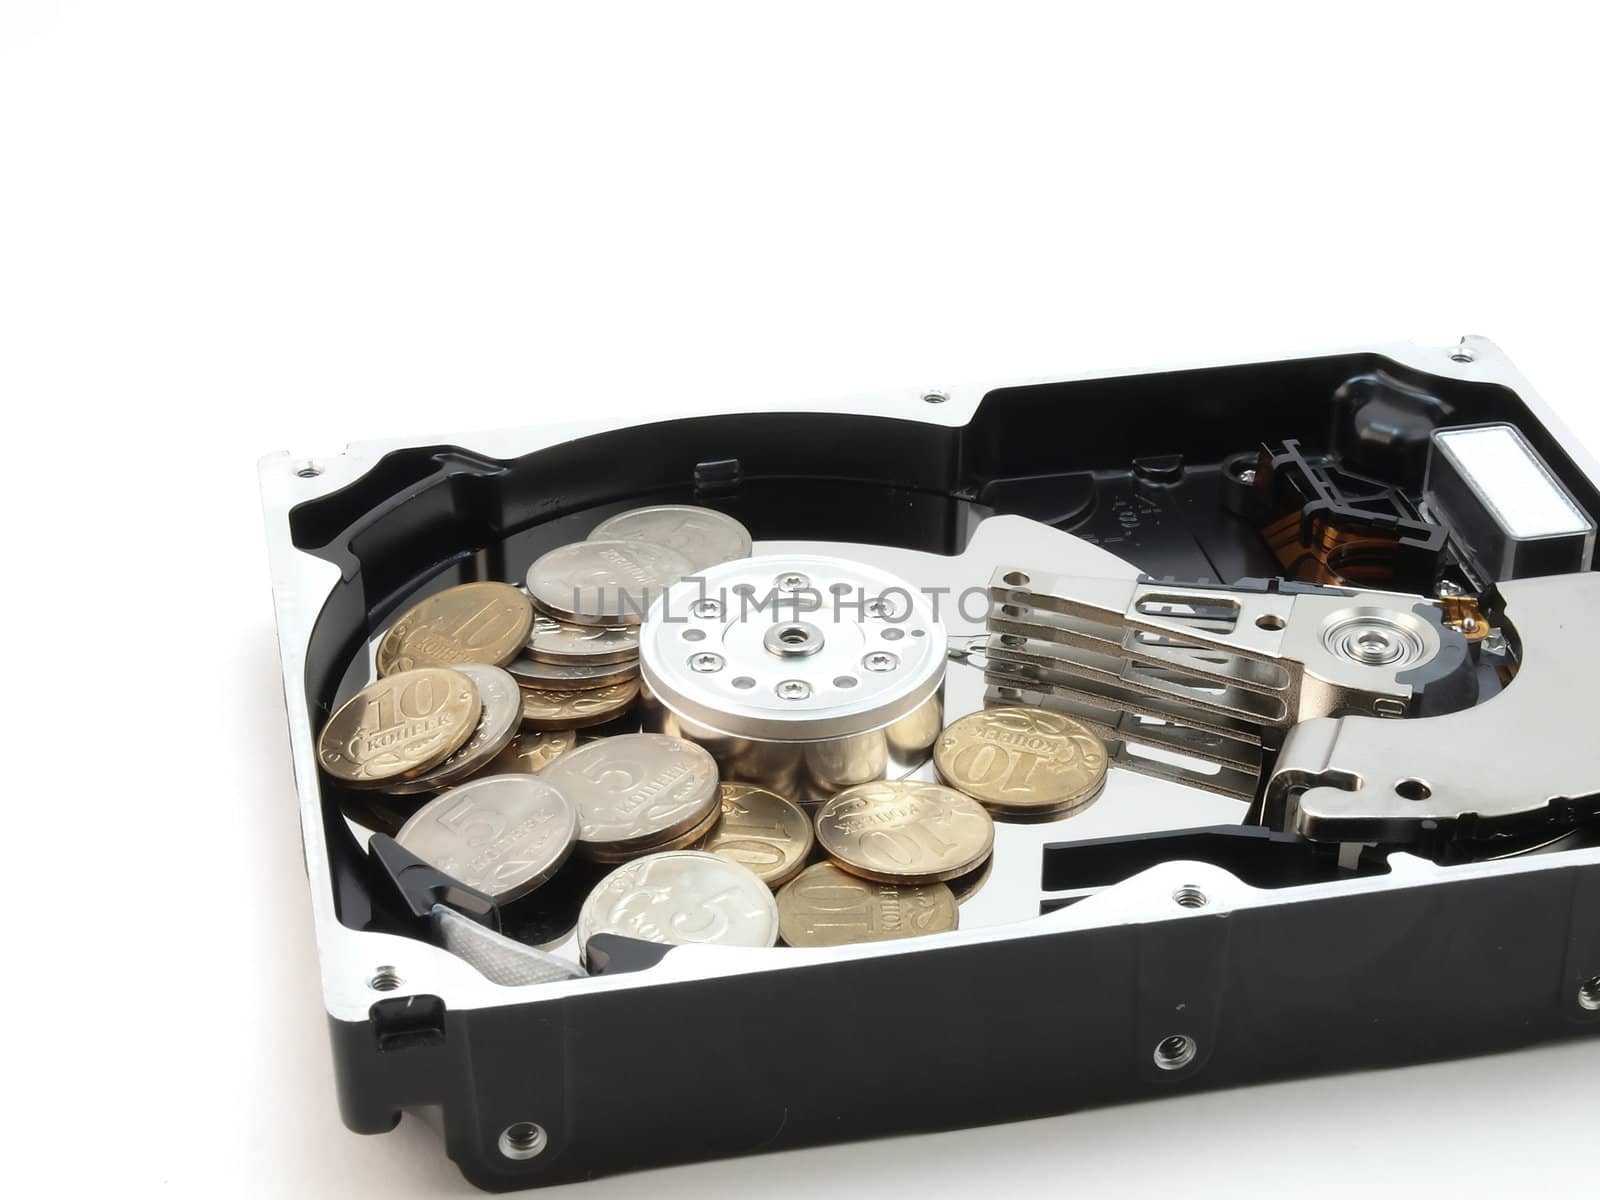 Hard drive with coin (money)